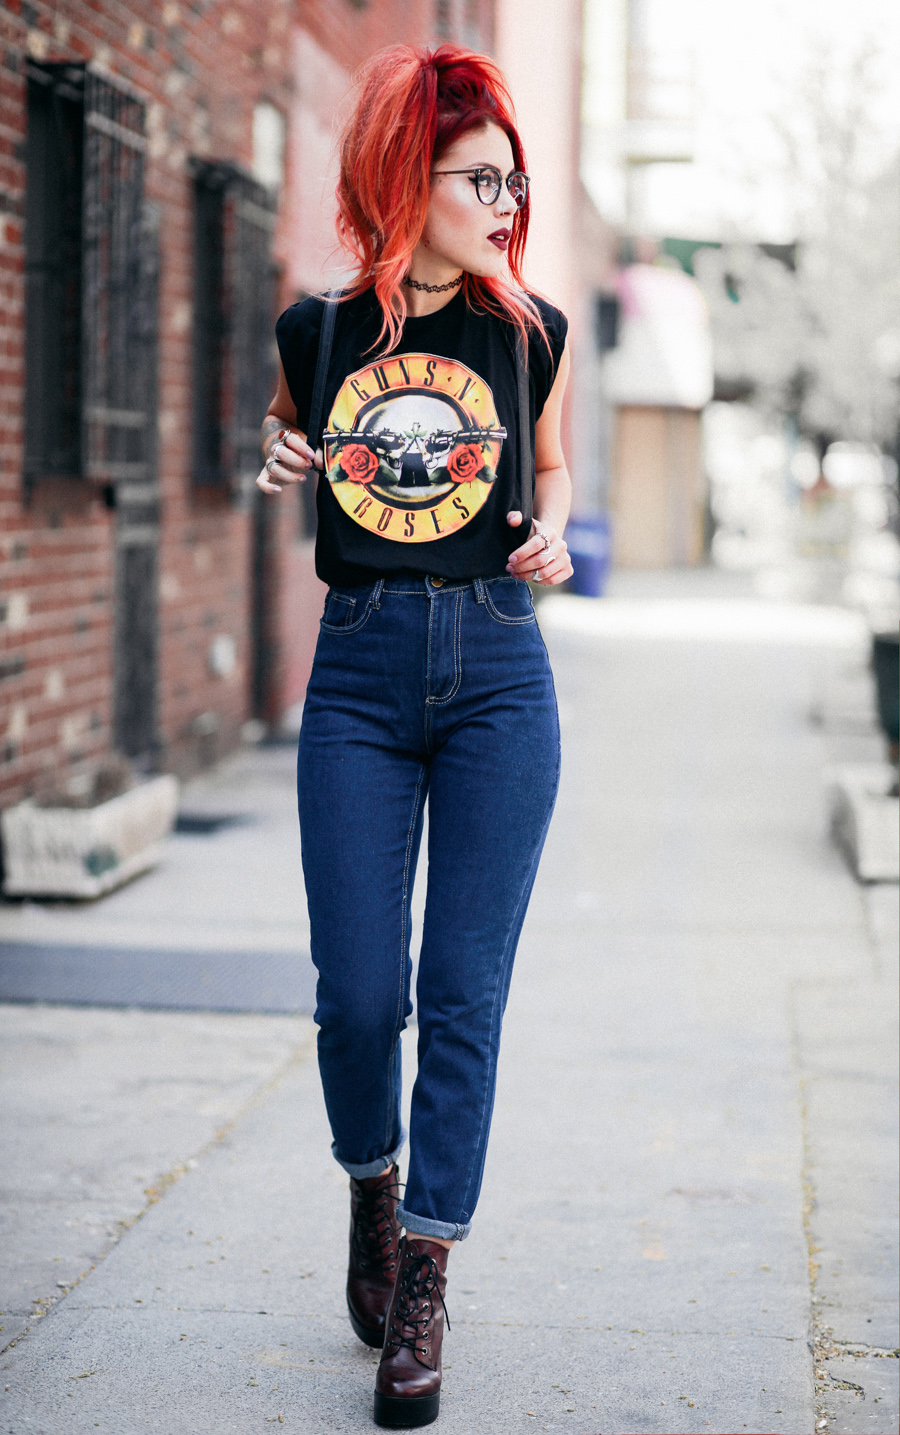 Le Happy wearing Guns n Roses tee and Steve Madden Booties